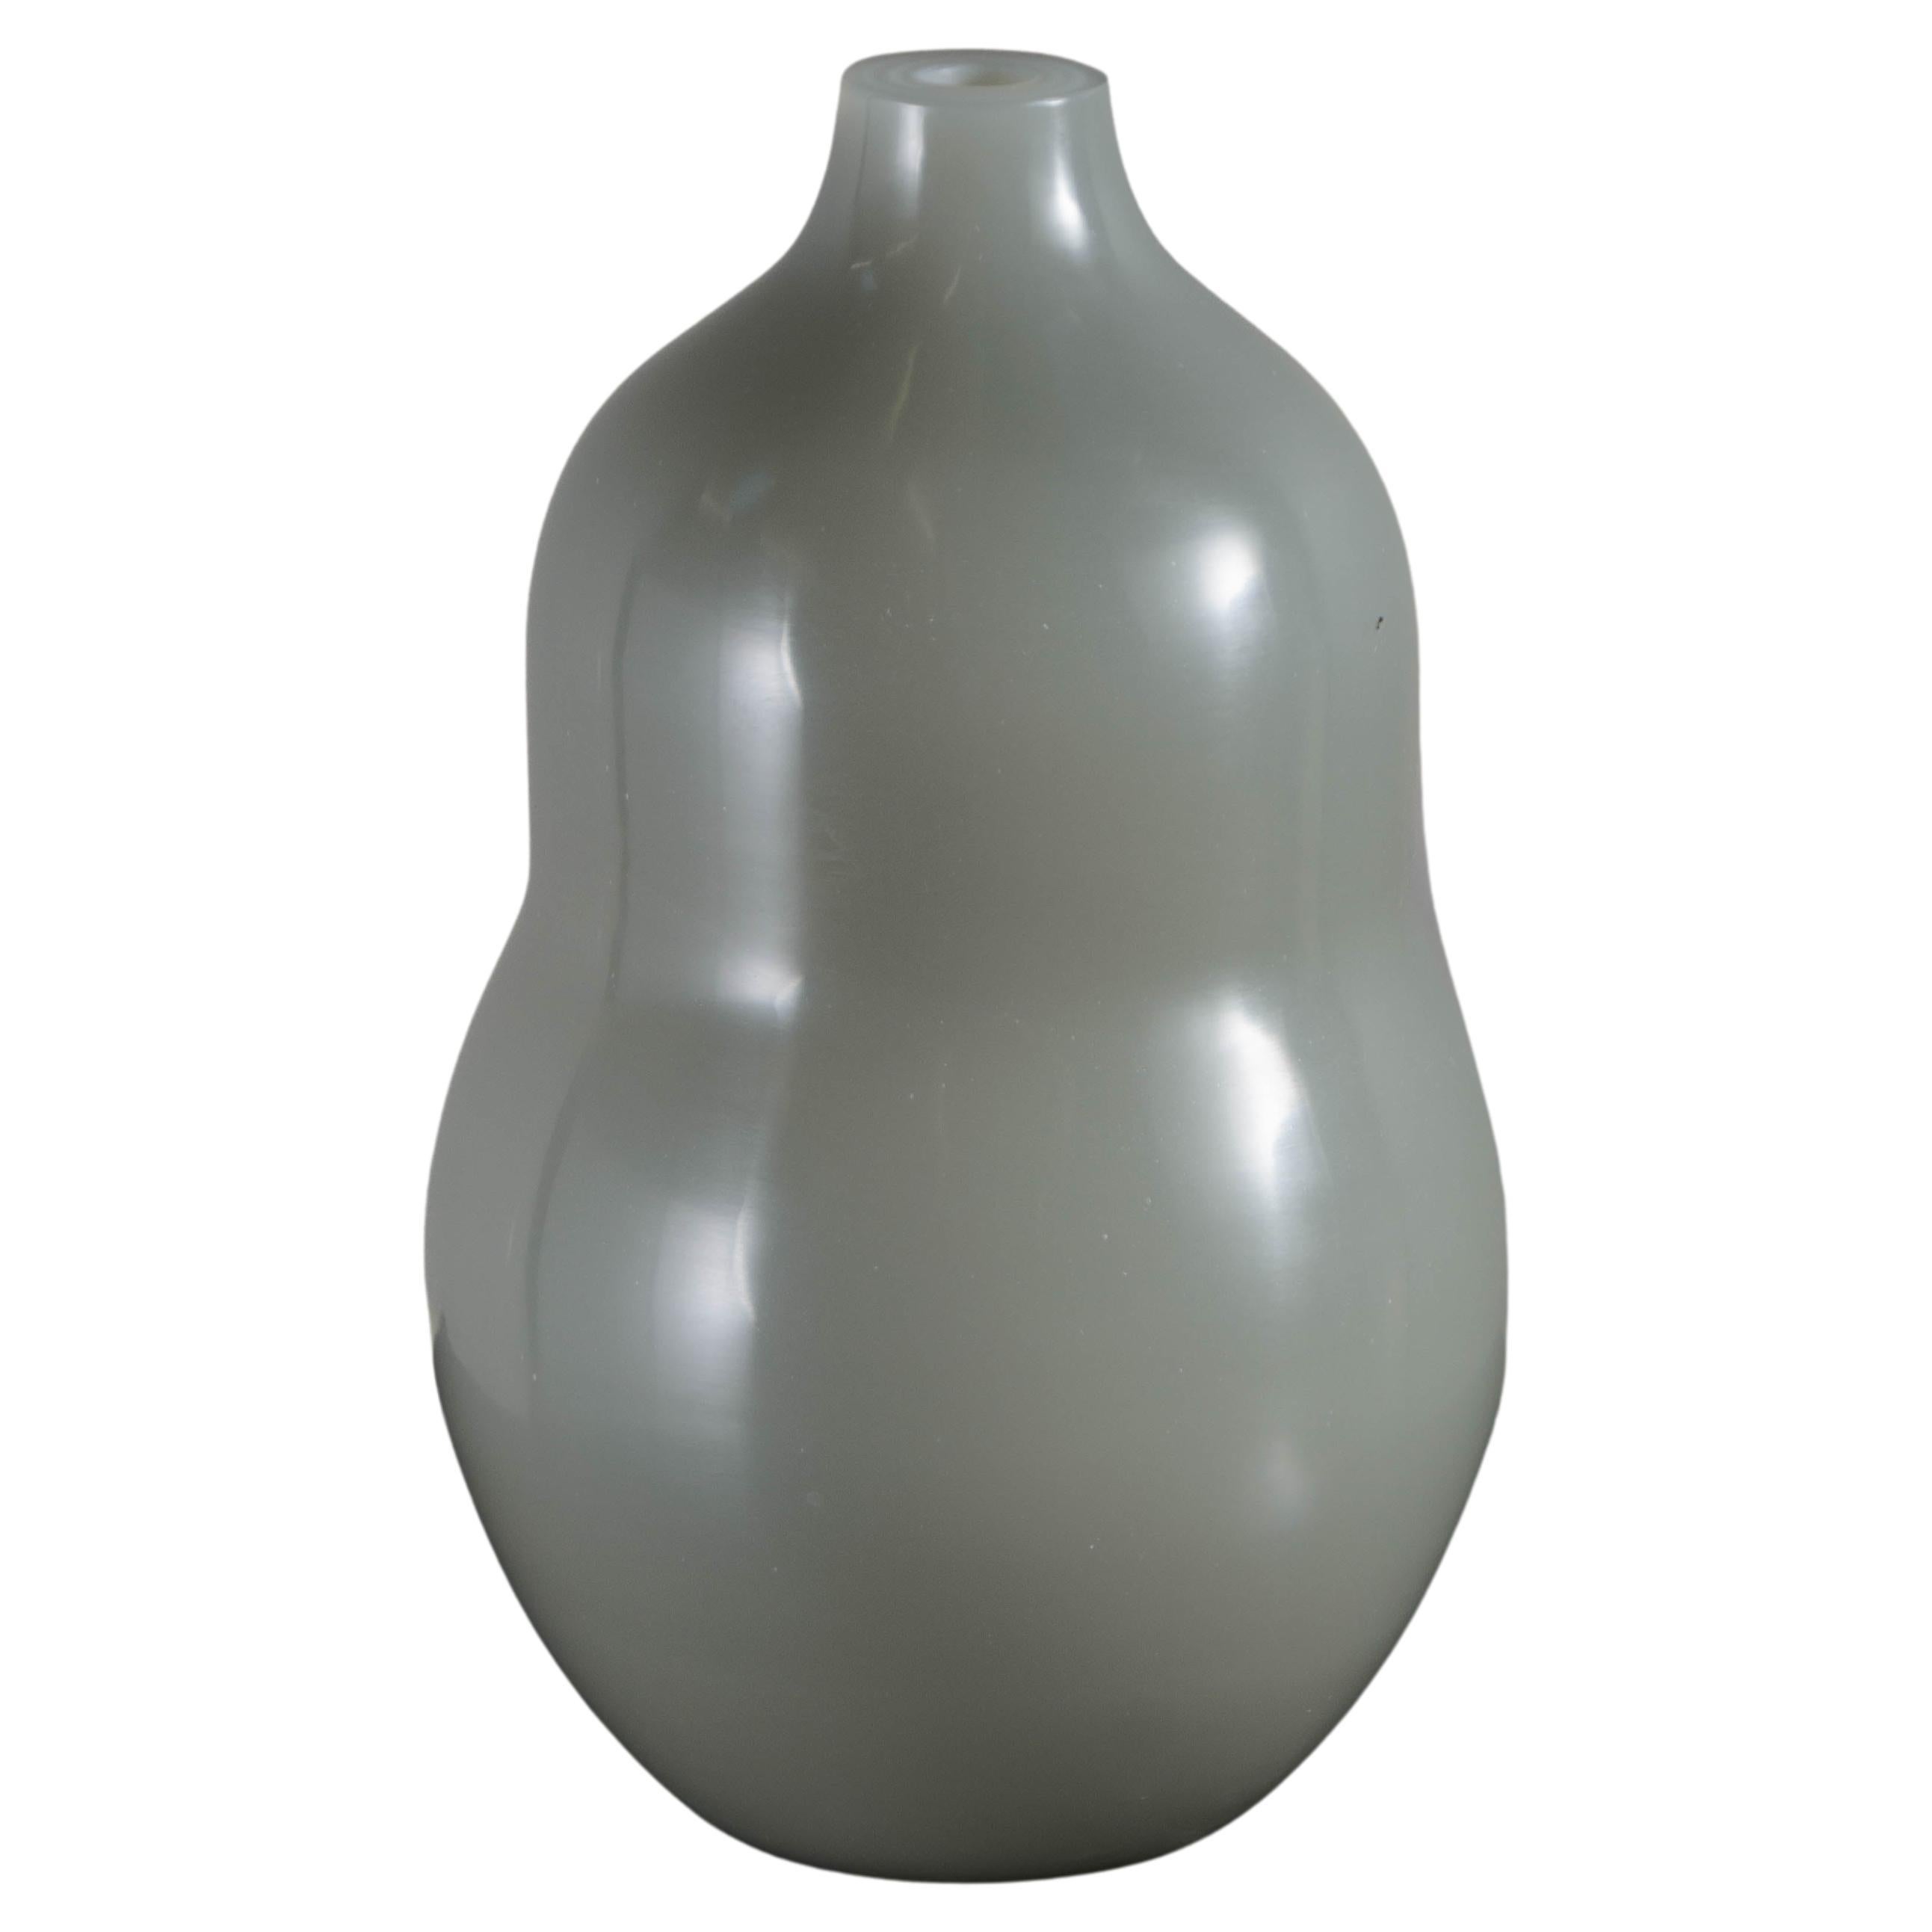 Contemporary Tall Gourd Vase in Grey Peking Glass by Robert Kuo, Limited Edition